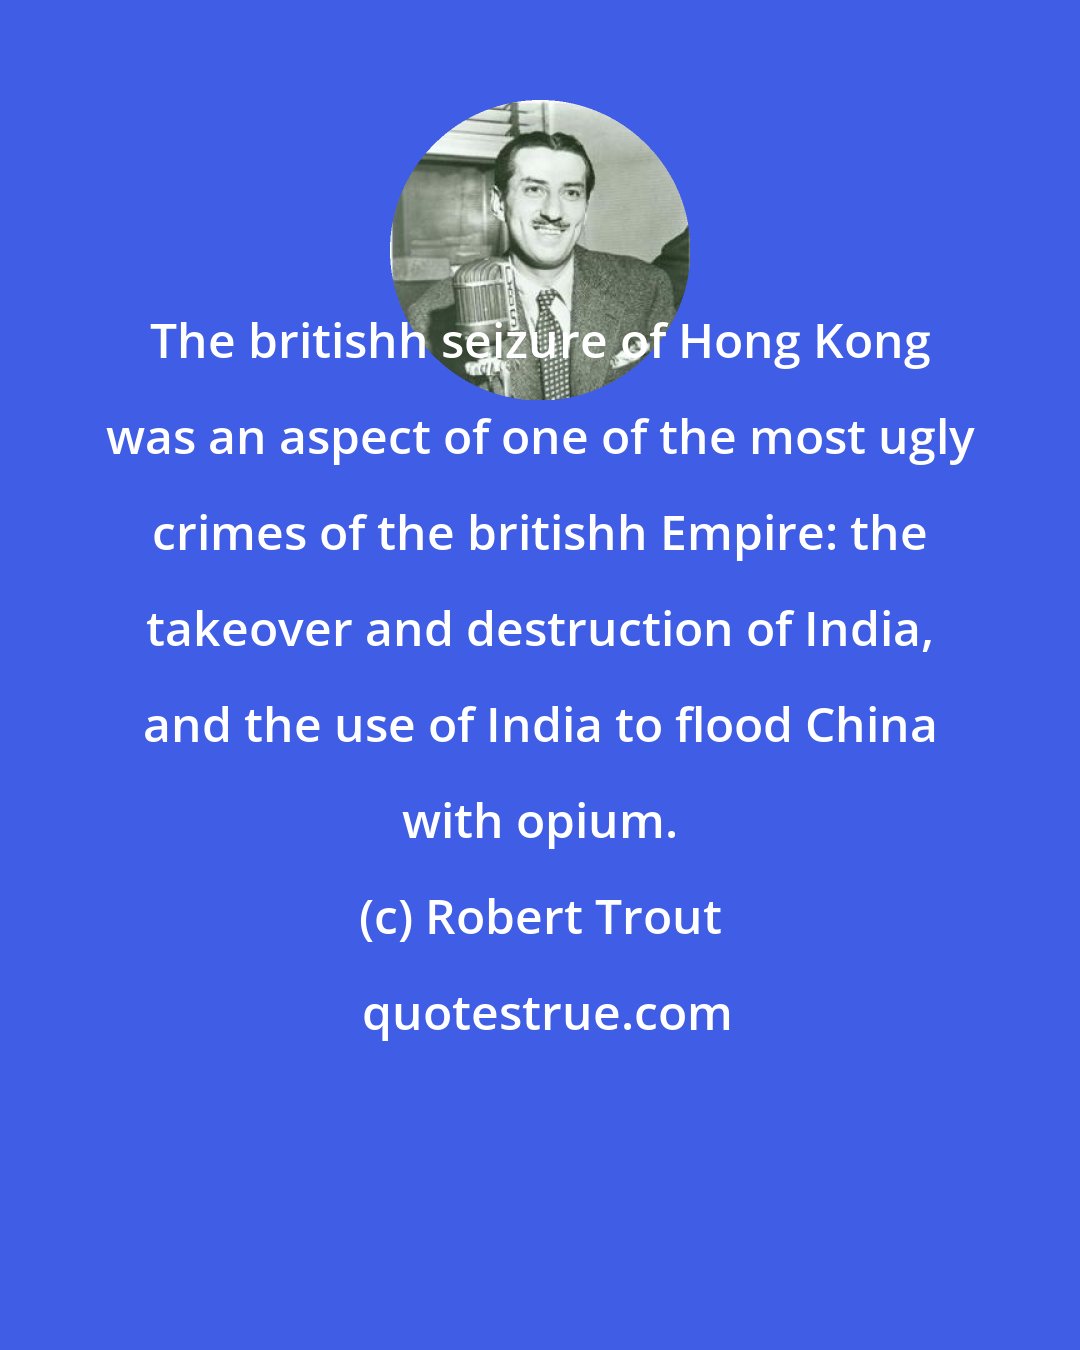 Robert Trout: The britishh seizure of Hong Kong was an aspect of one of the most ugly crimes of the britishh Empire: the takeover and destruction of India, and the use of India to flood China with opium.